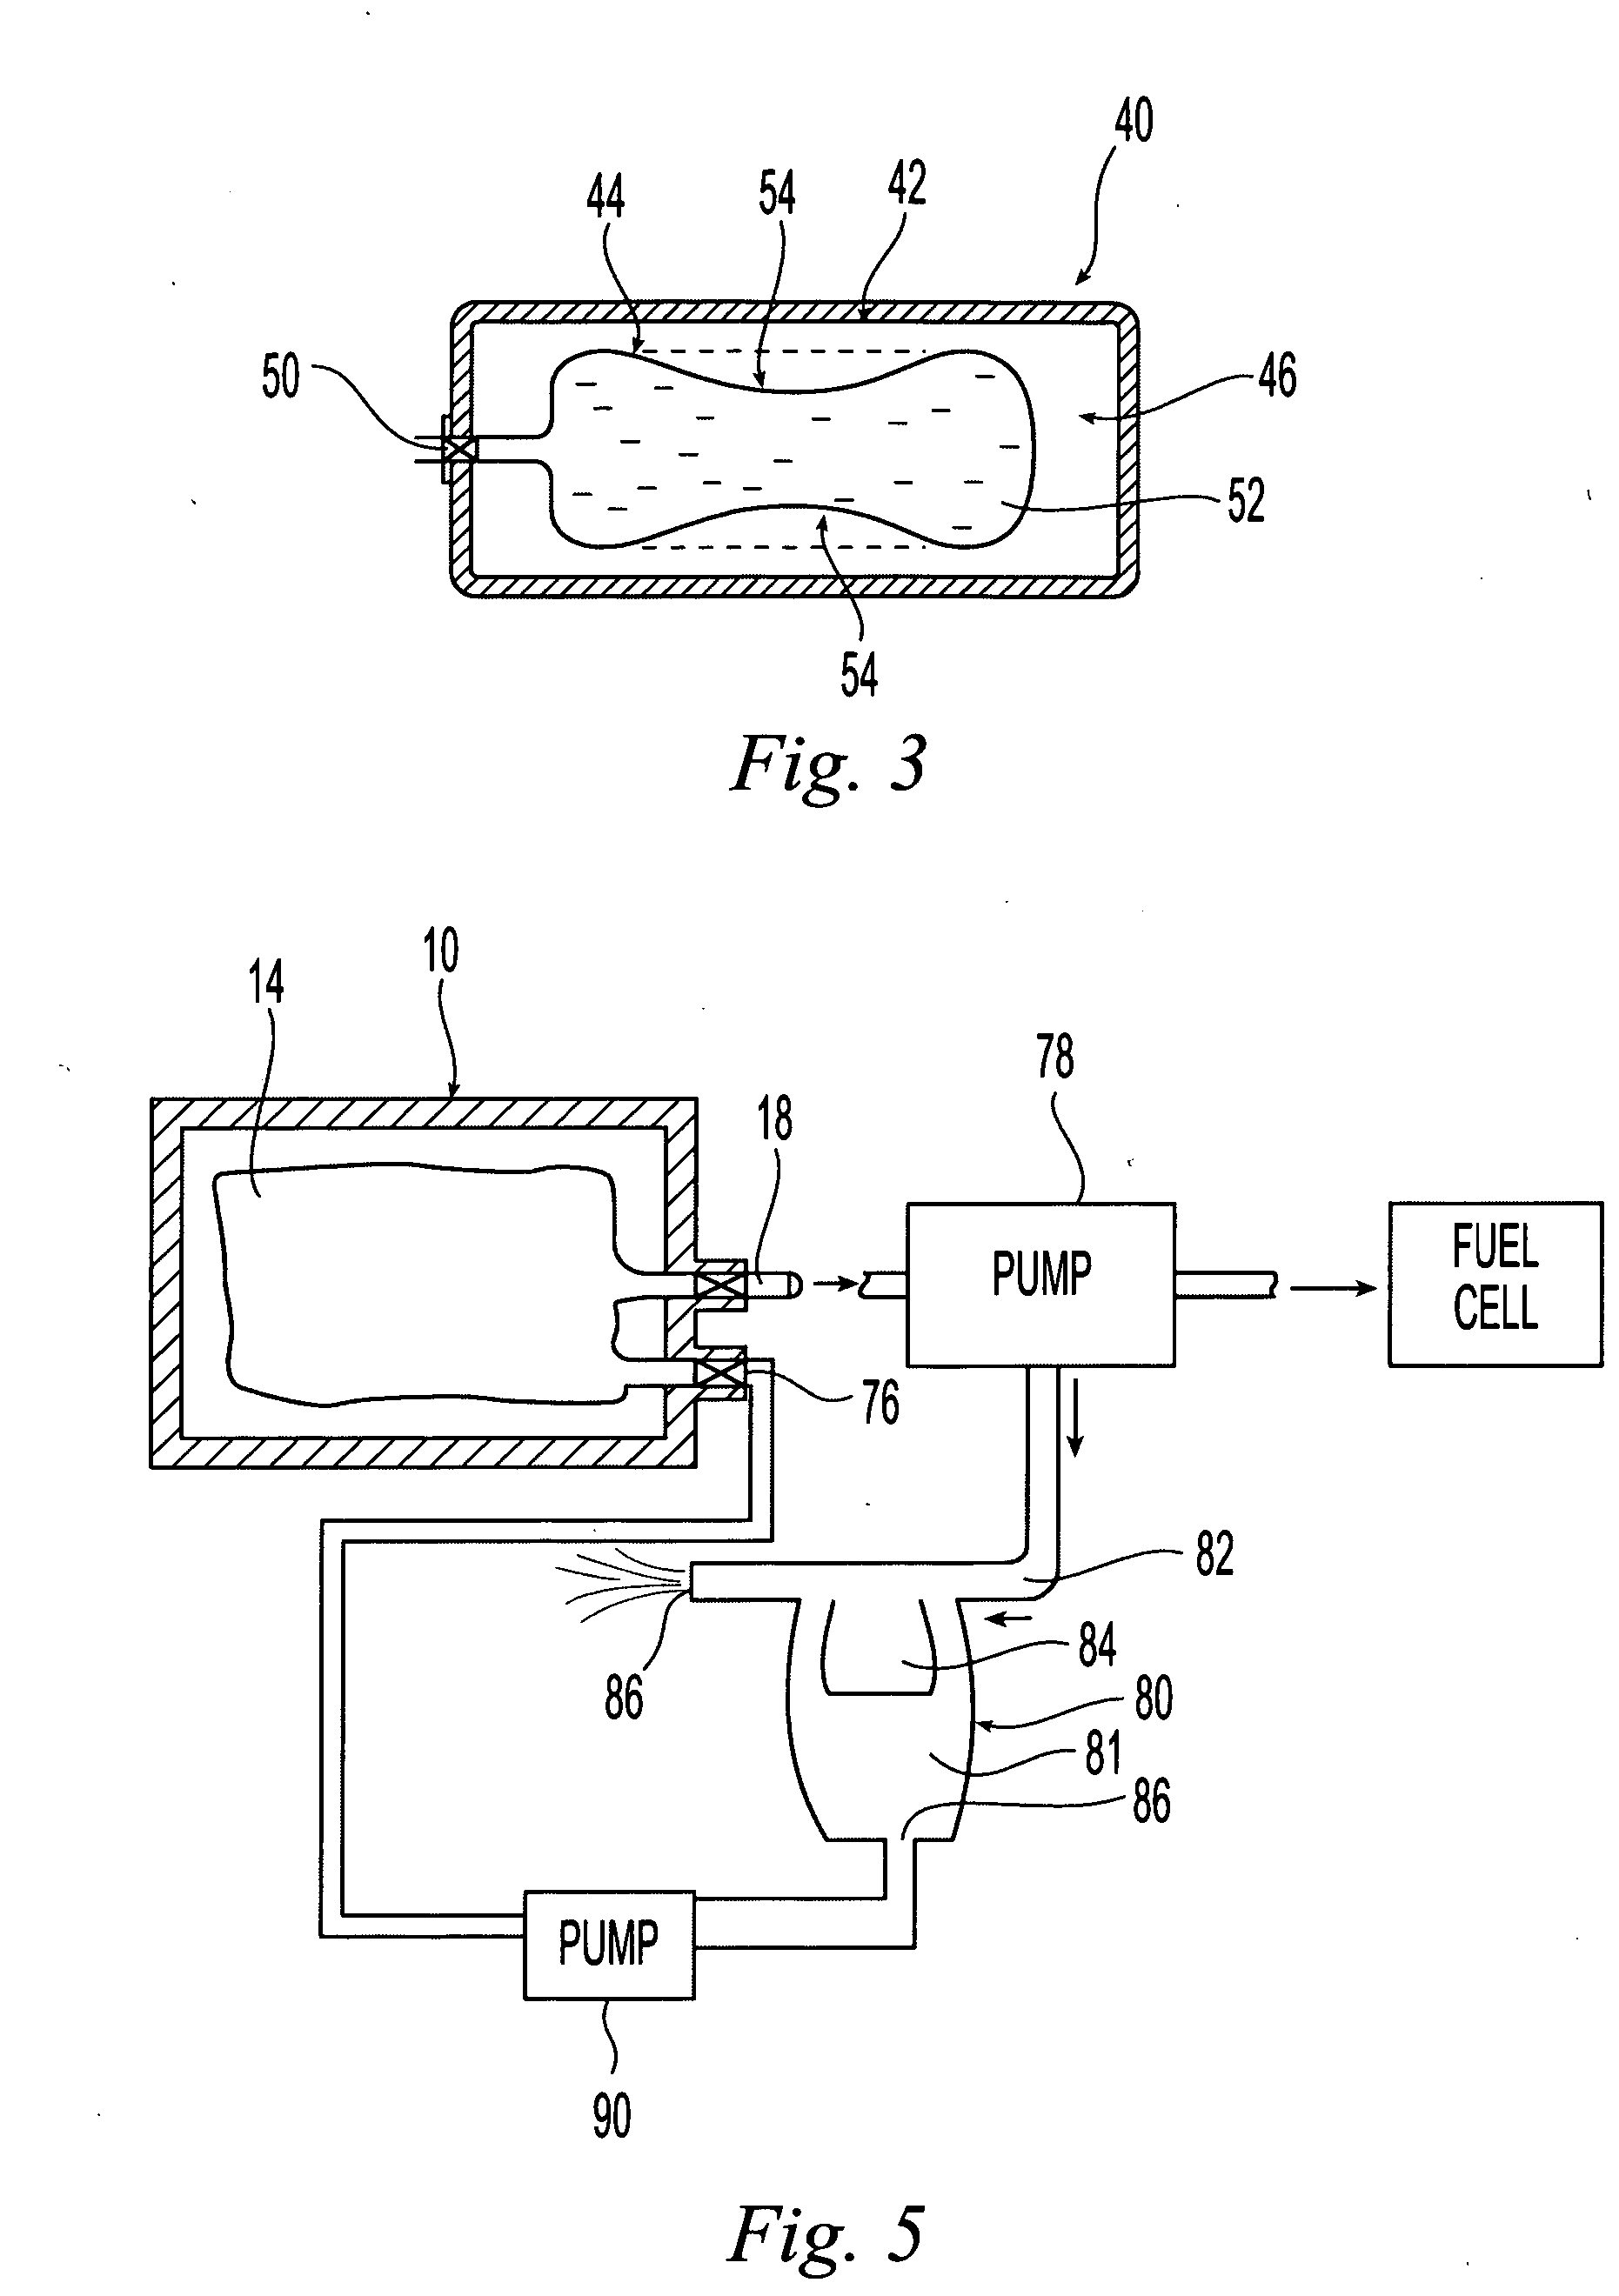 Fuel cartridge for fuel cells